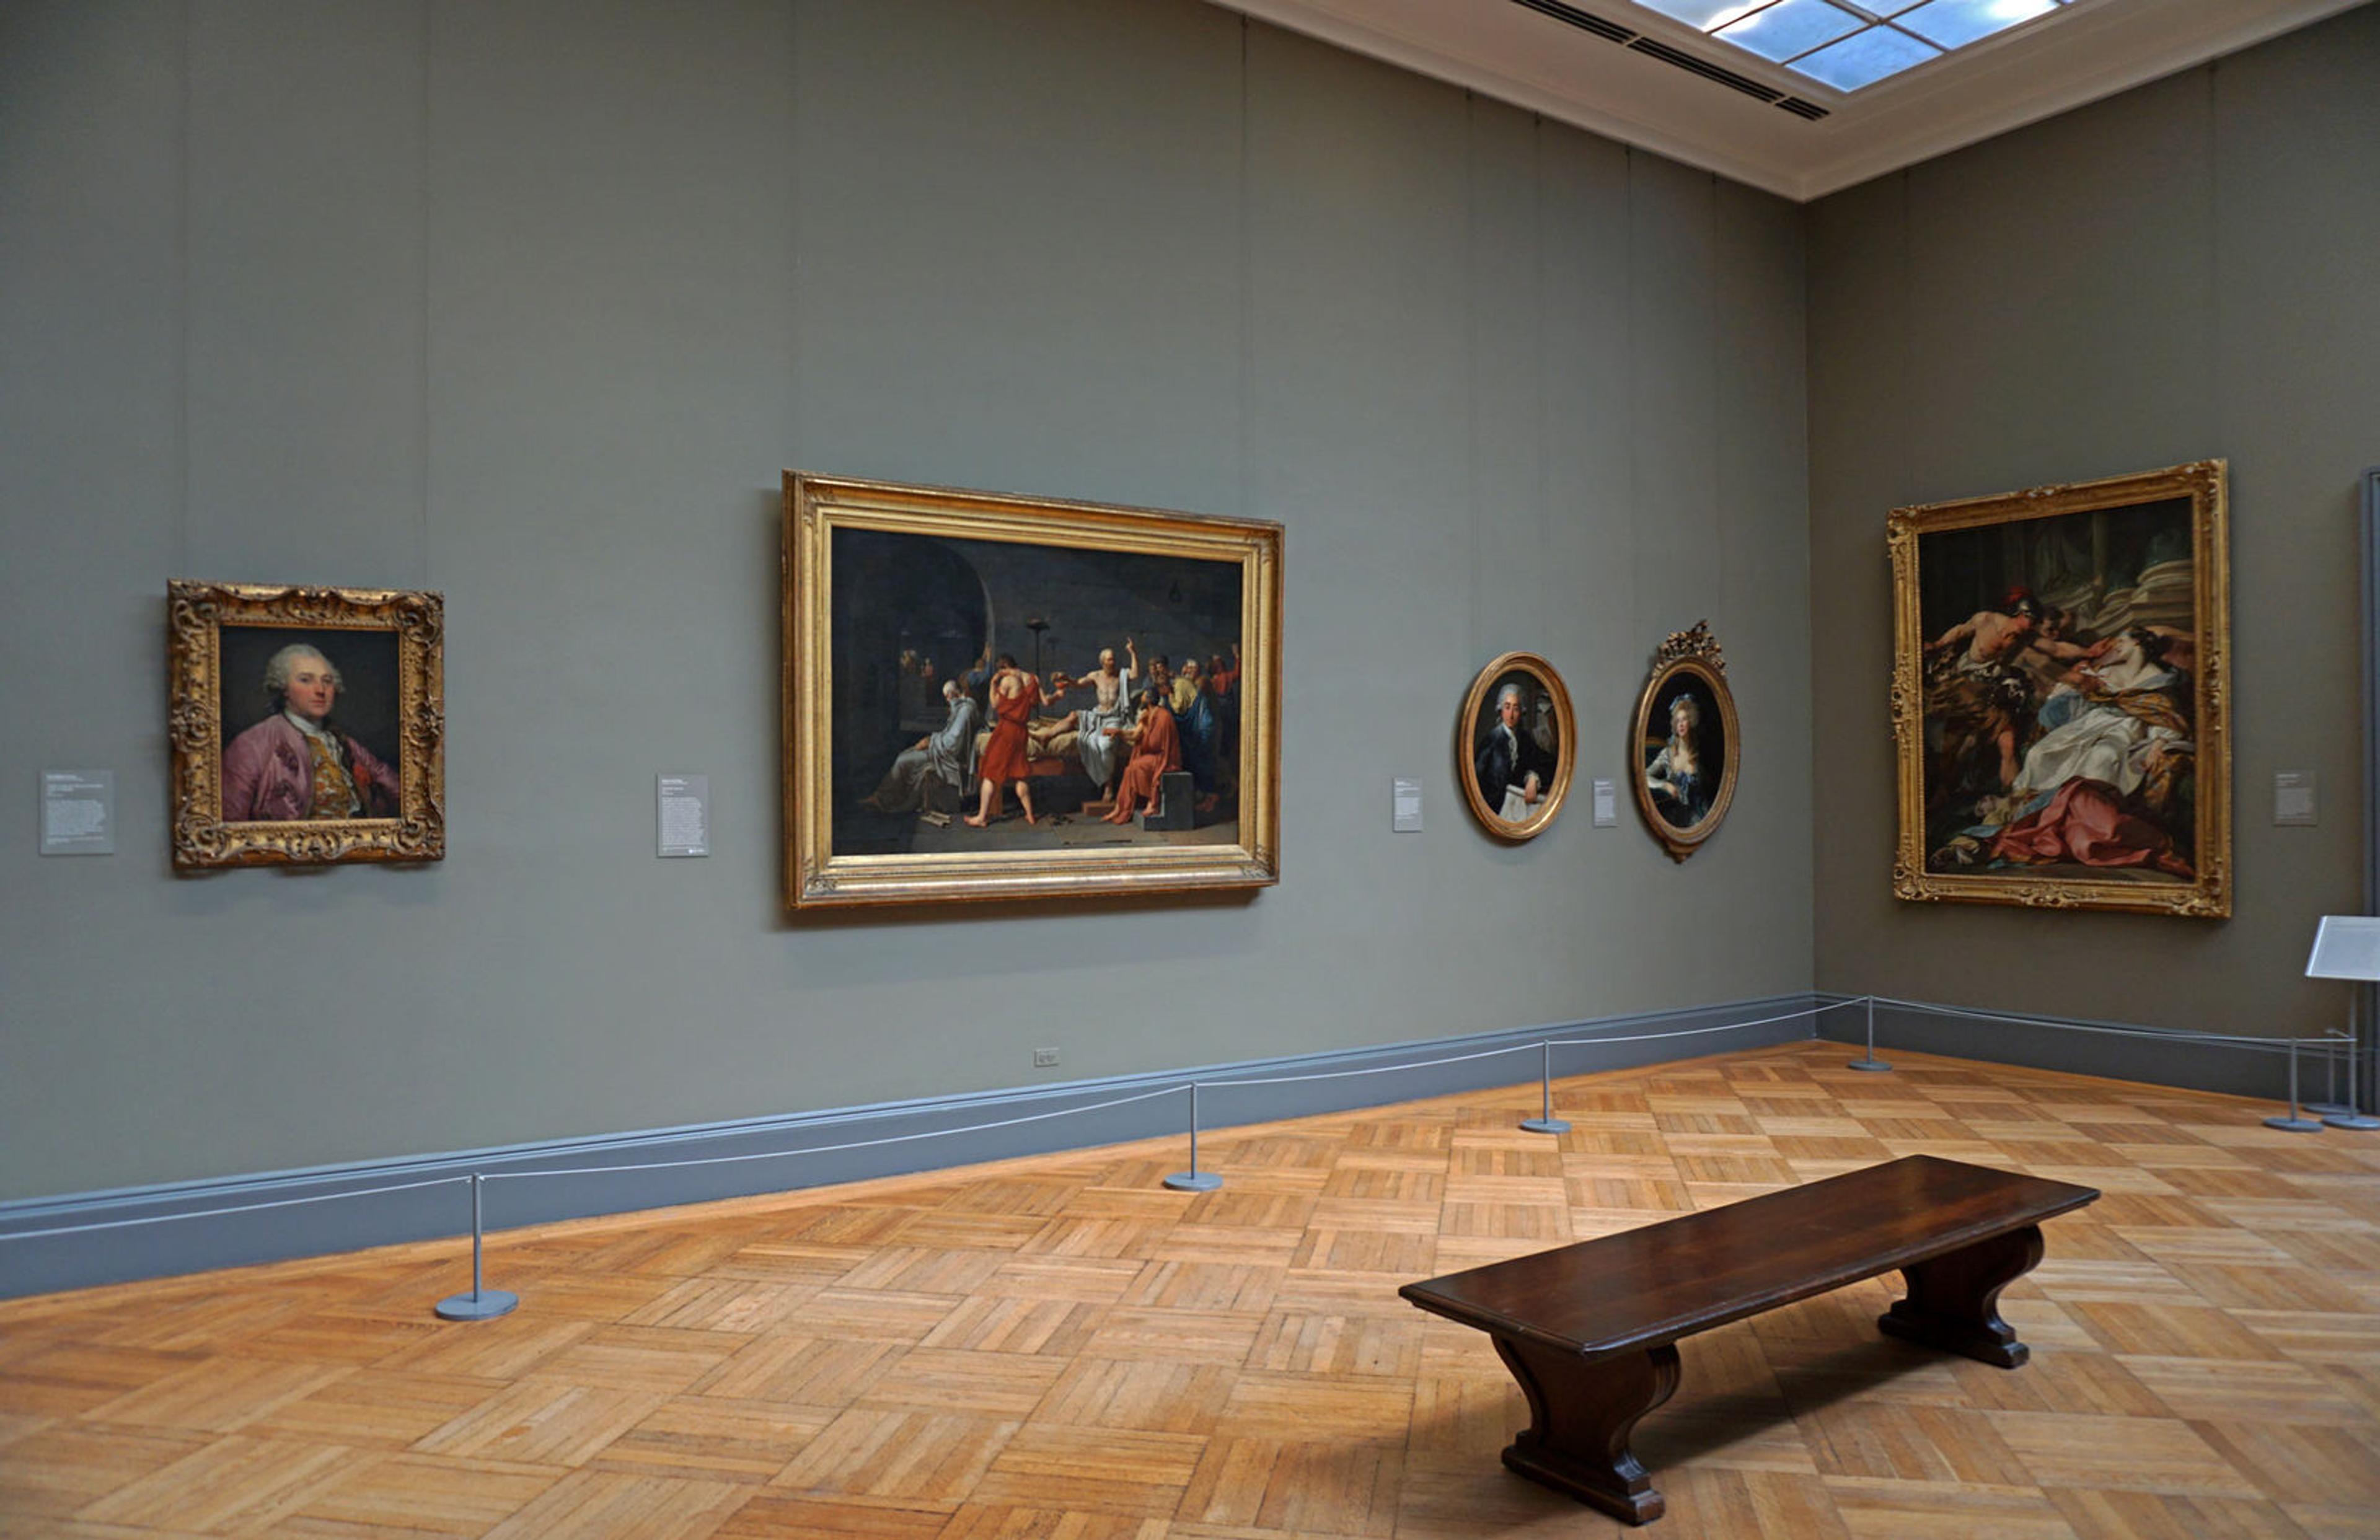 One of The Met's European Paintings galleries, with Jacques Louis David's "Death of Socrates" at the center